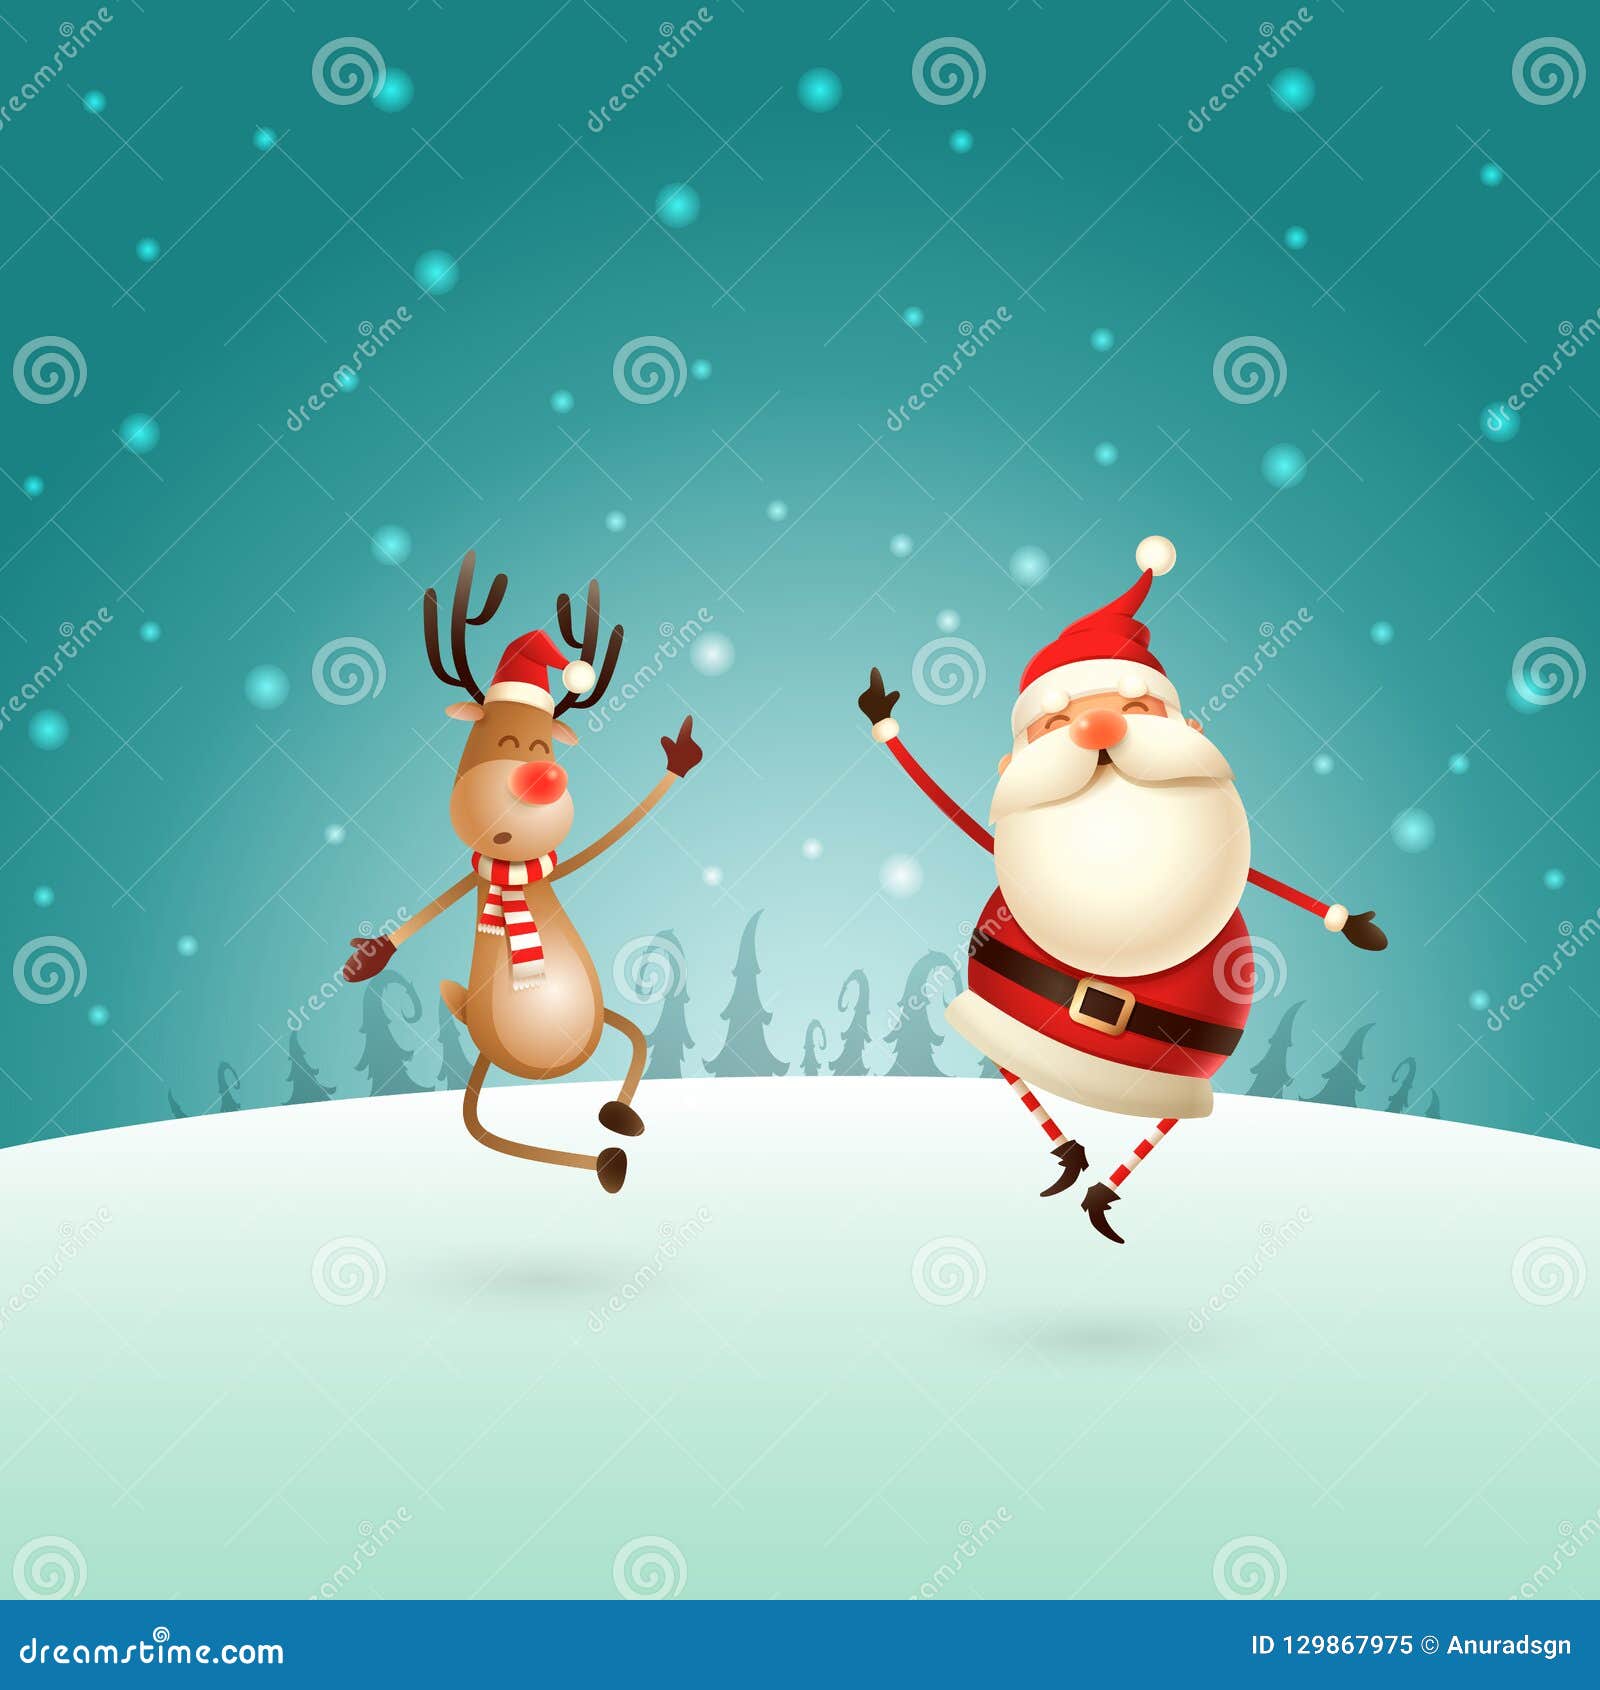 happy expresion of santa claus and reindeer - they jumping straight up and bring their heels claping together right under on win